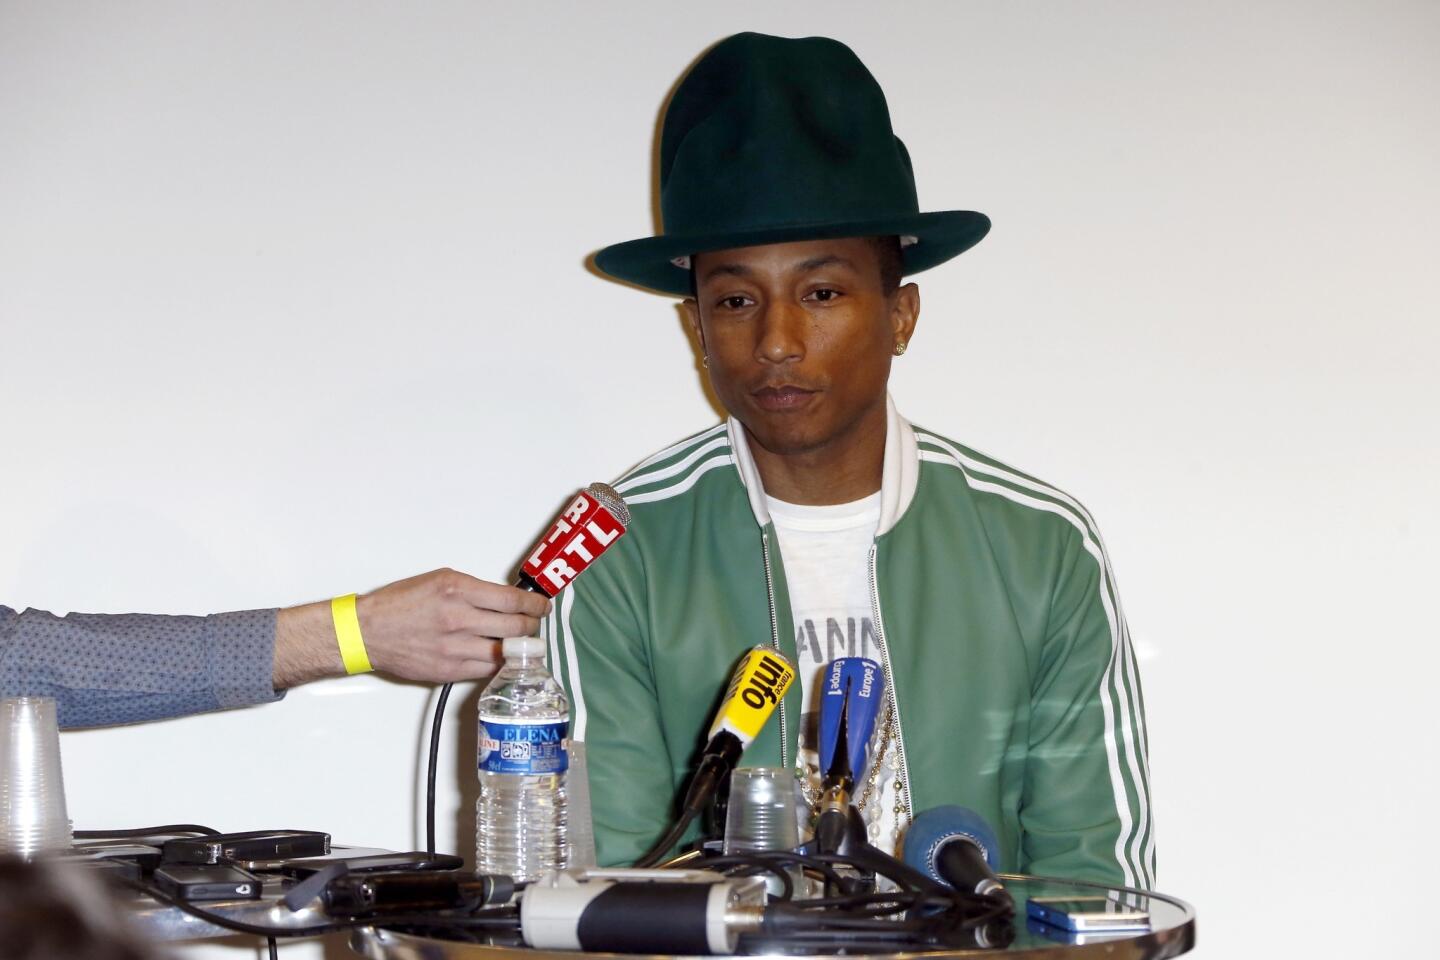 Pharrell Williams' quest for total domination of pop, and our hearts, continues with the singer-producer's announcement that he'll release his first album in nearly eight years, "G I R L," on March 3. If the album sounds anything like his gleeful clap-along "Happy" -- which might score him an Oscar -- or his slinky Grammy-winning work with Daft Punk (the robotic French duo also appear on the record), the soundtrack of this summer has just arrived.